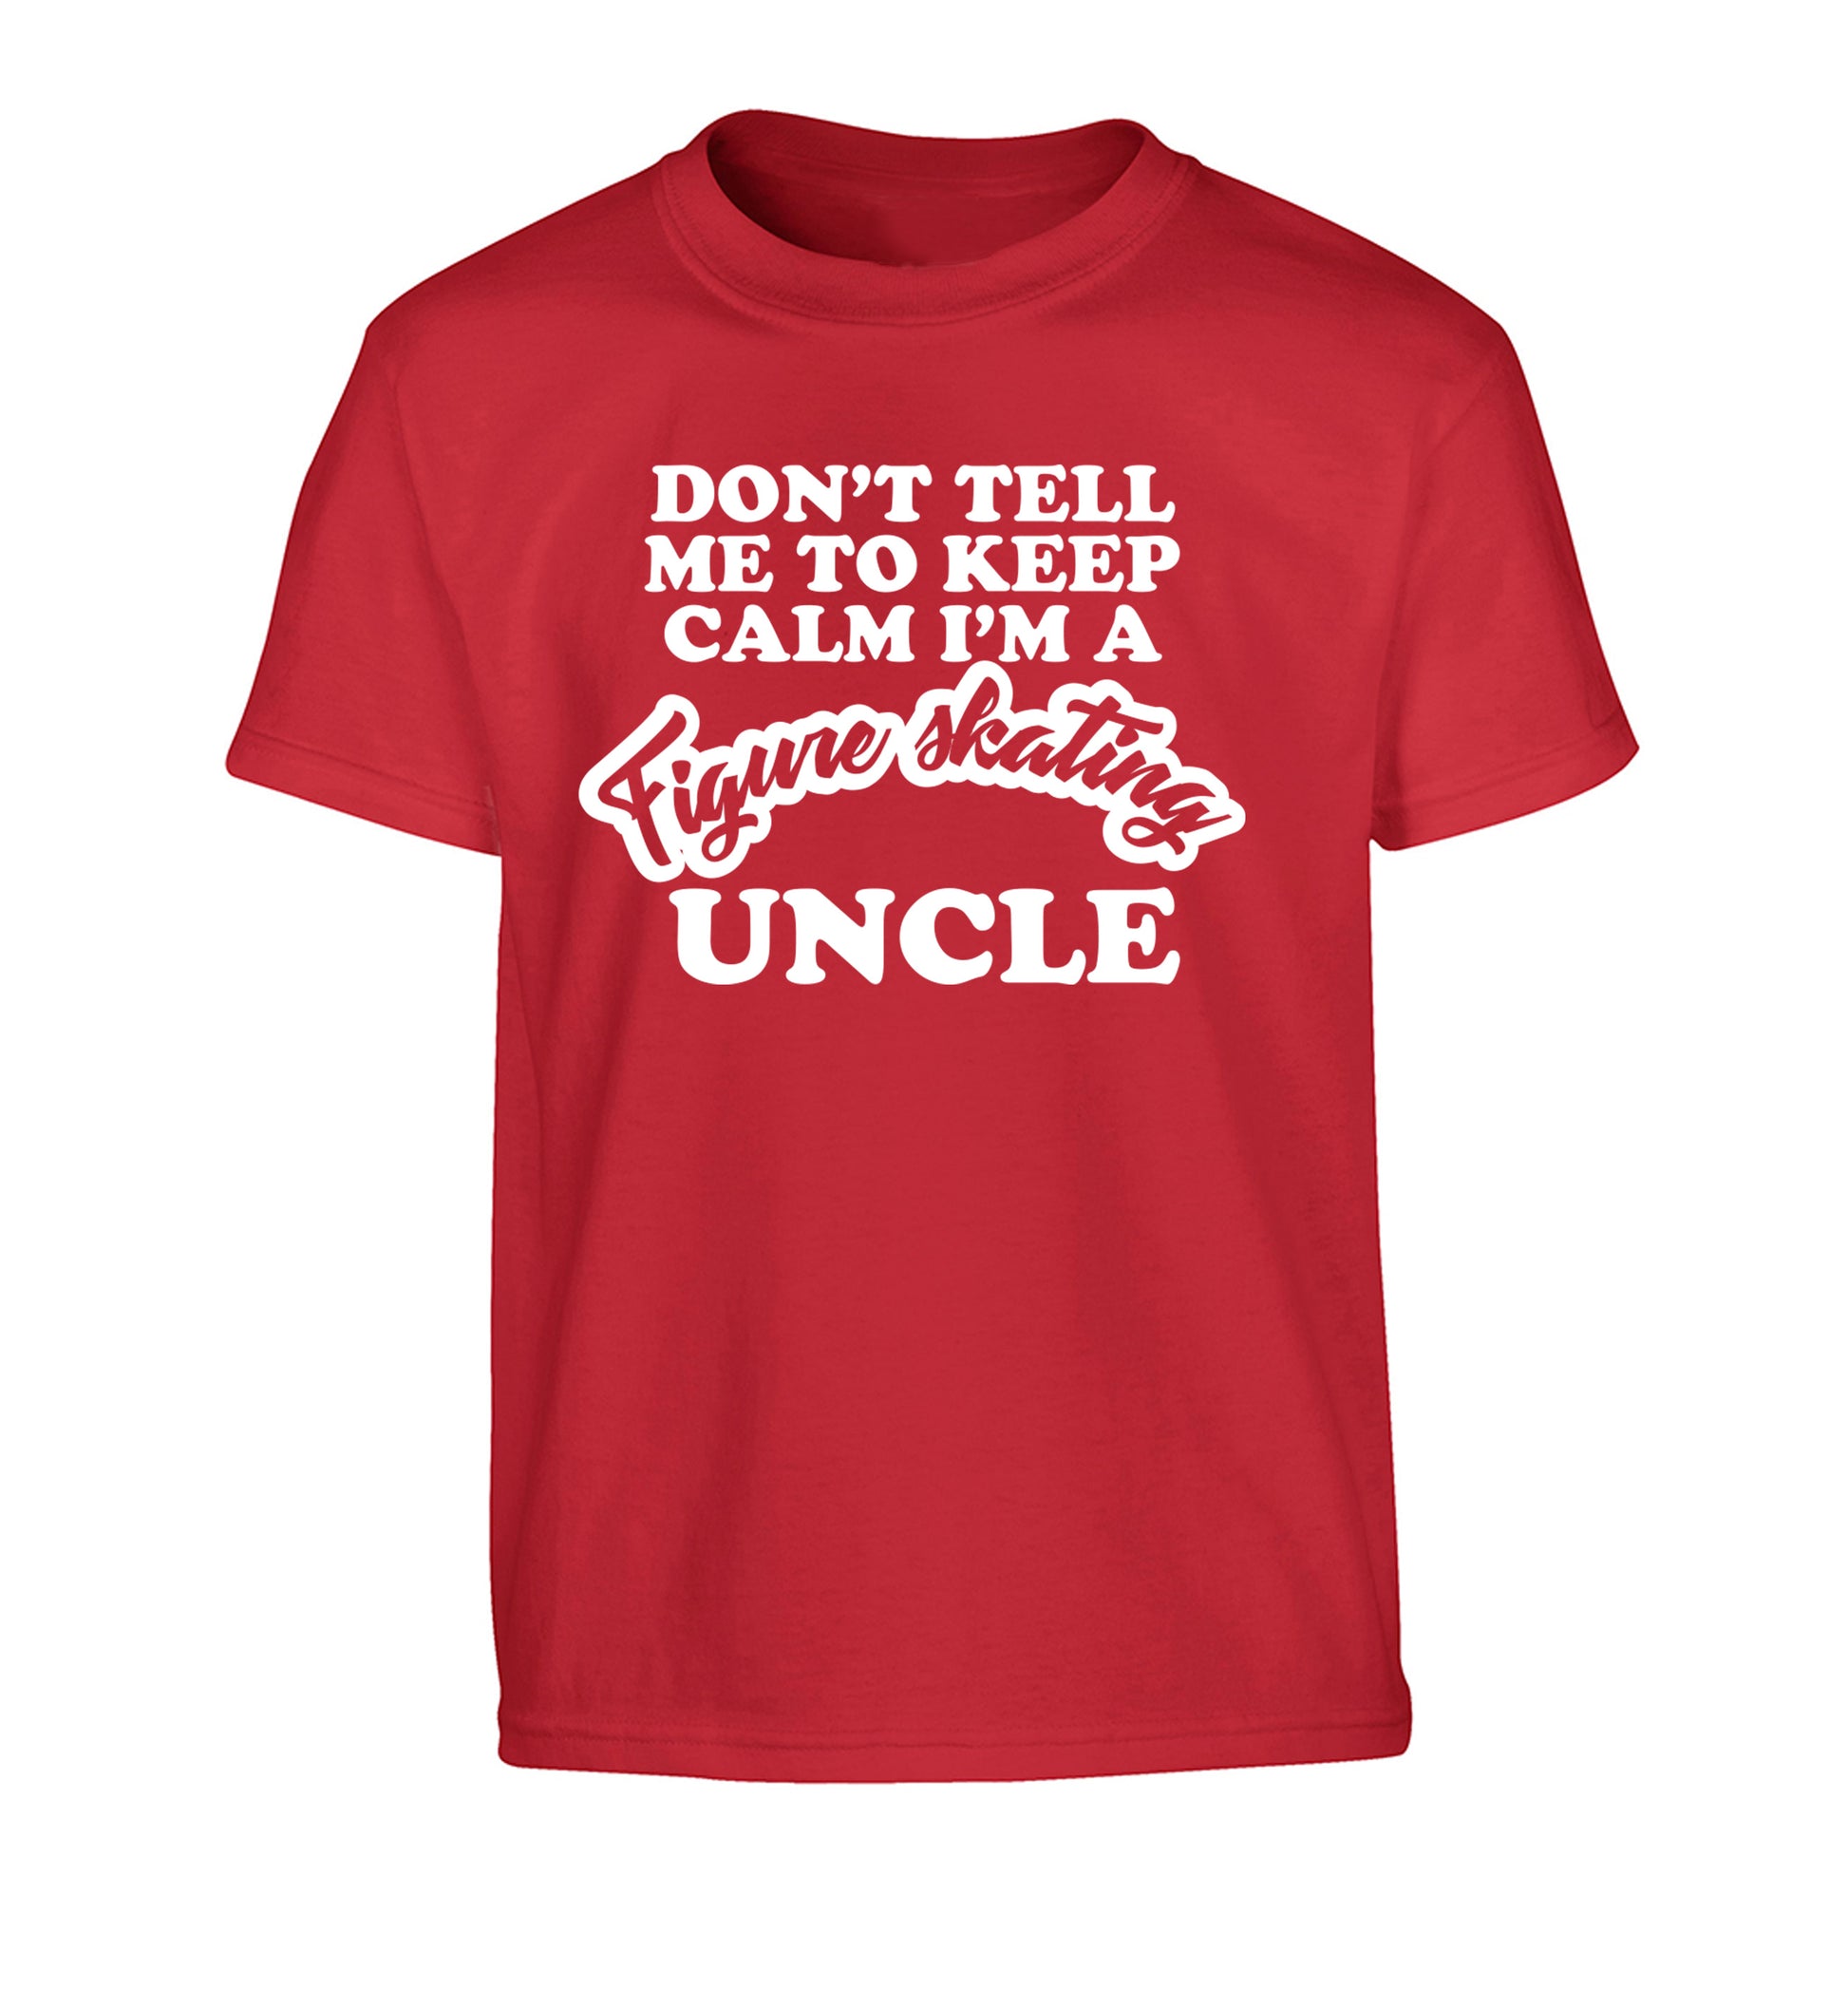 Don't tell me to keep calm I'm a figure skating uncle Children's red Tshirt 12-14 Years